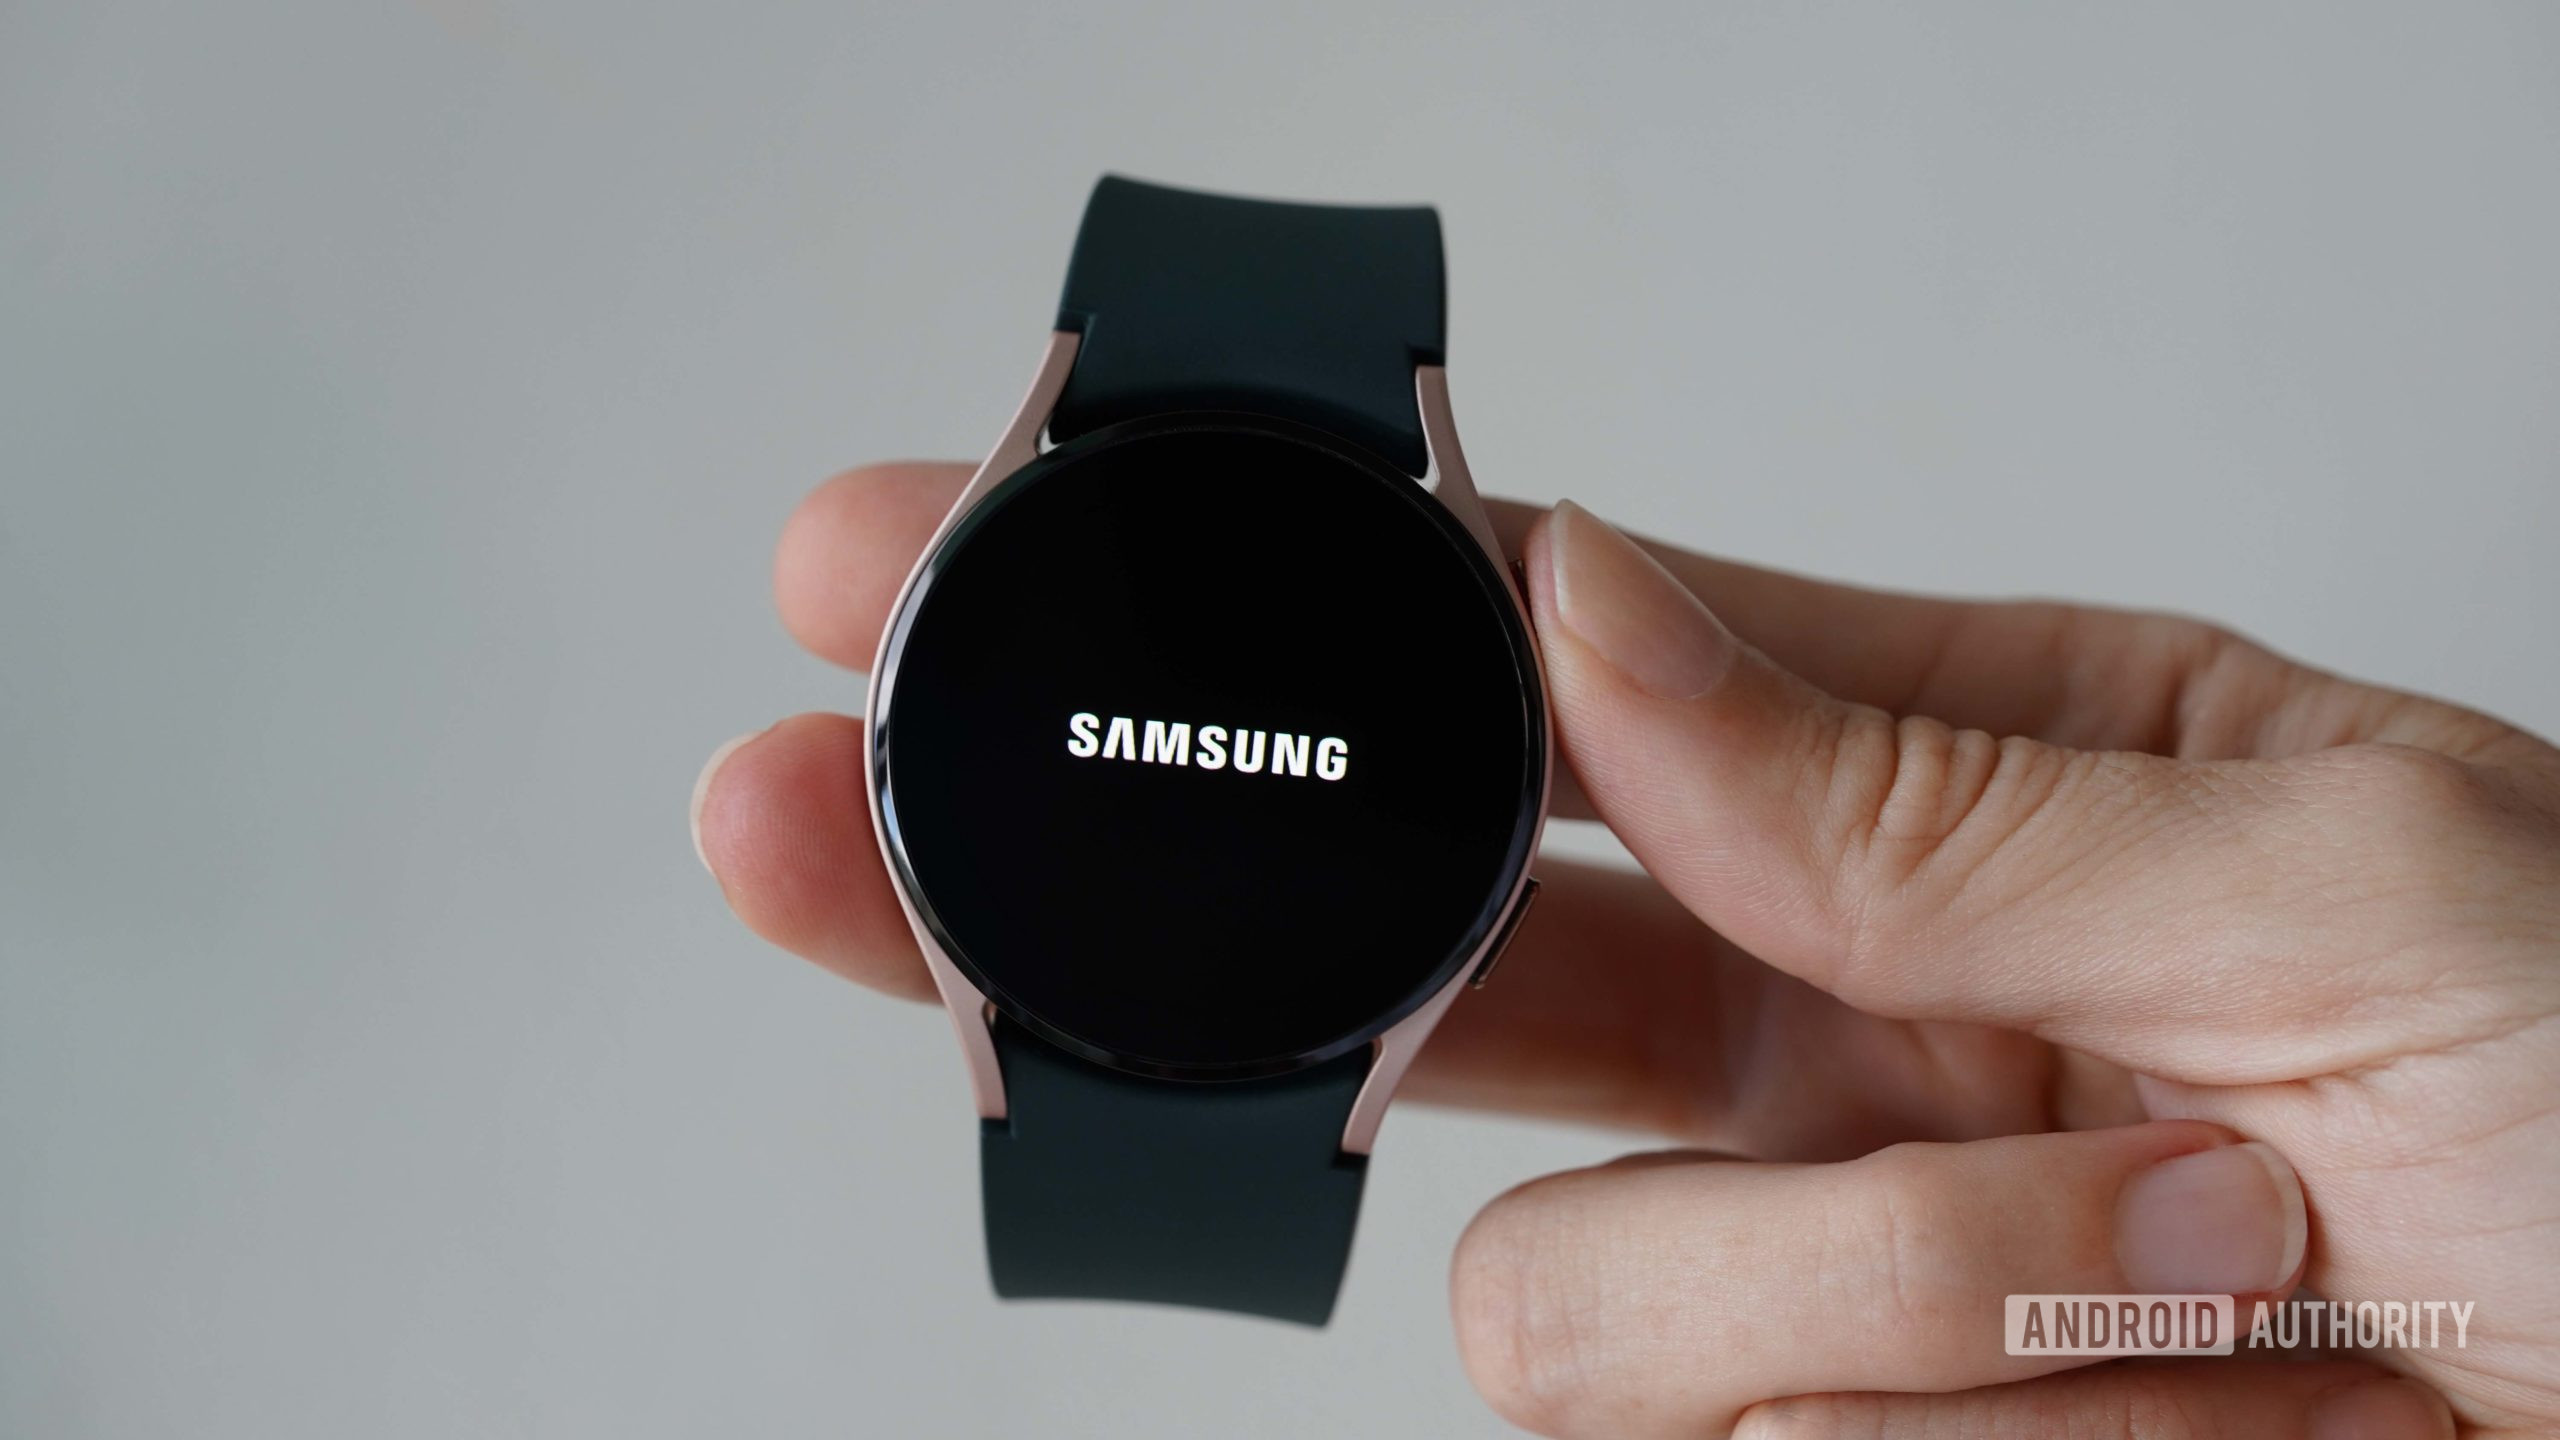 User turns on the Samsung Galaxy Watch 4 by holding down the top button.